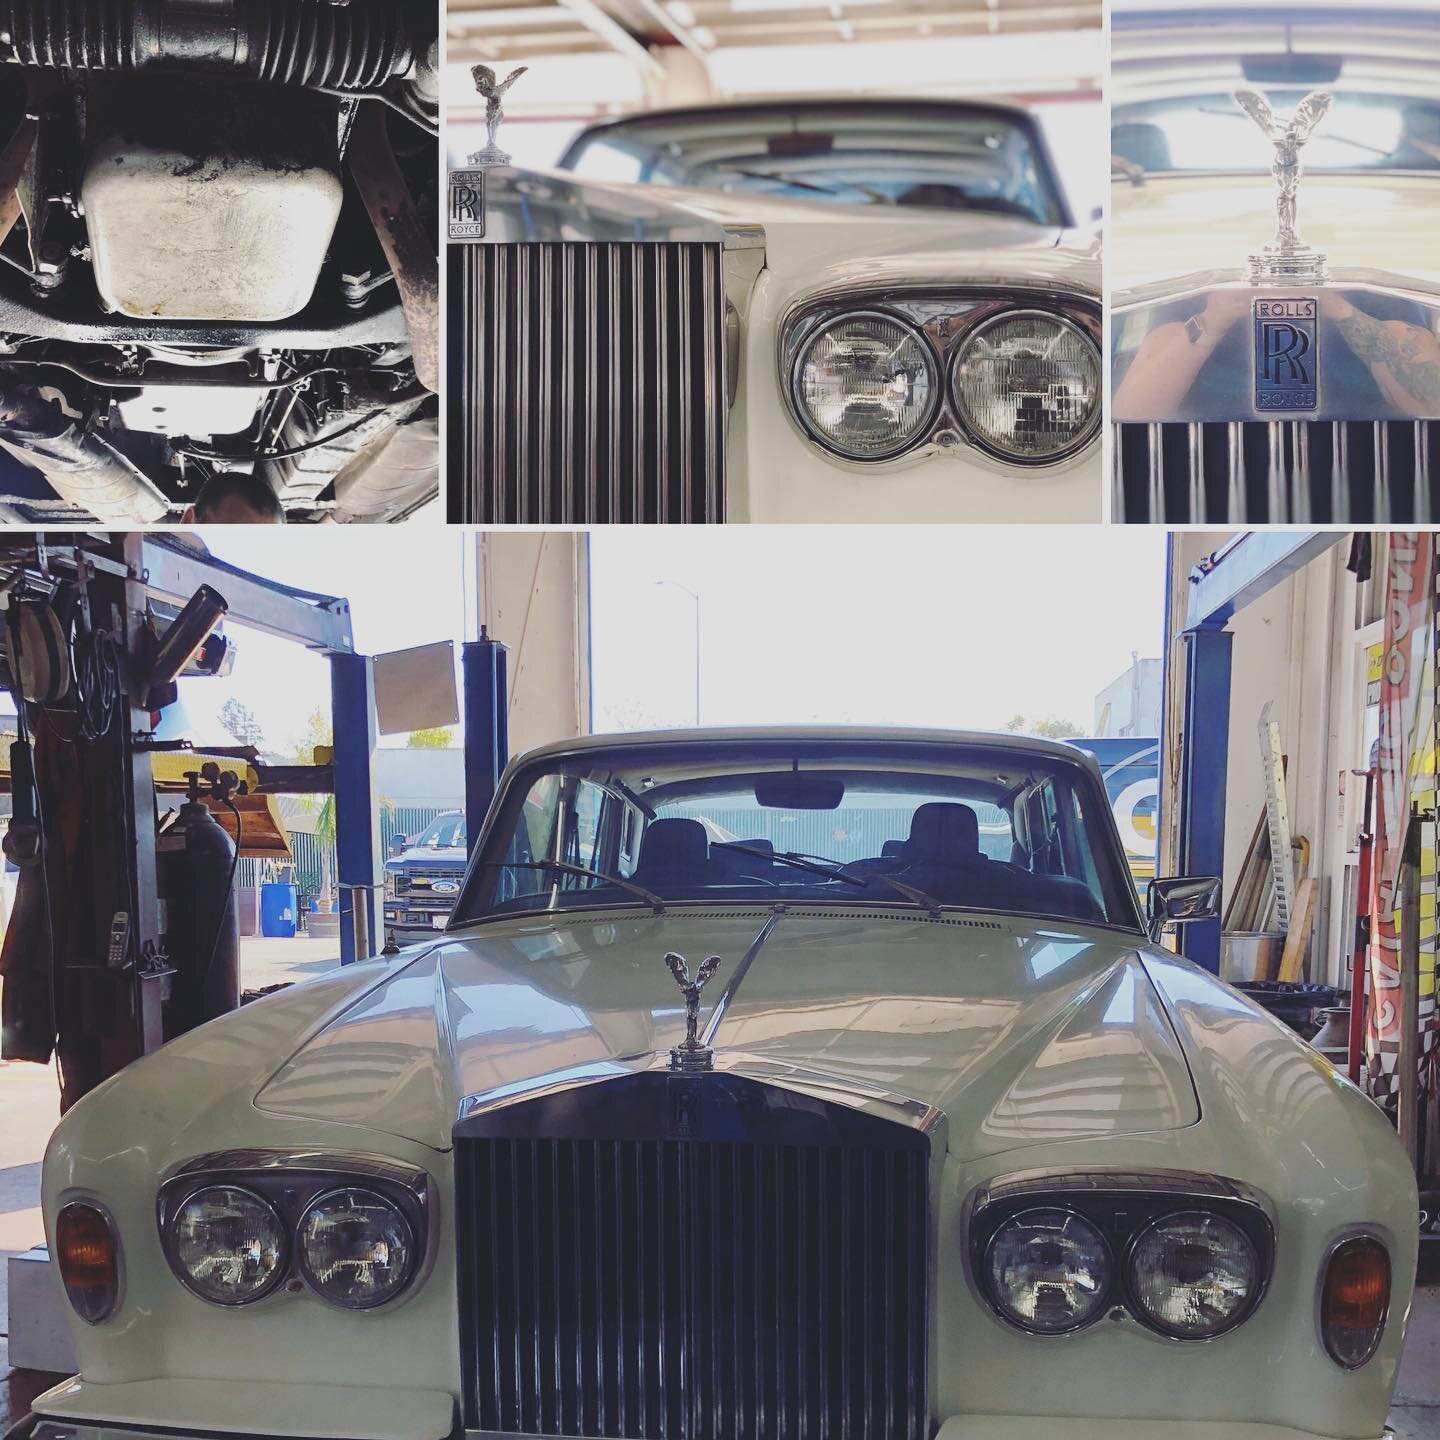 We worked on the exhaust system to an 1967 Antique Rolls Roy&rsquo;s!  Beautiful well maintained vehicle!  We make sure to do the work right! #antiquerollsroyce #rollsroyce